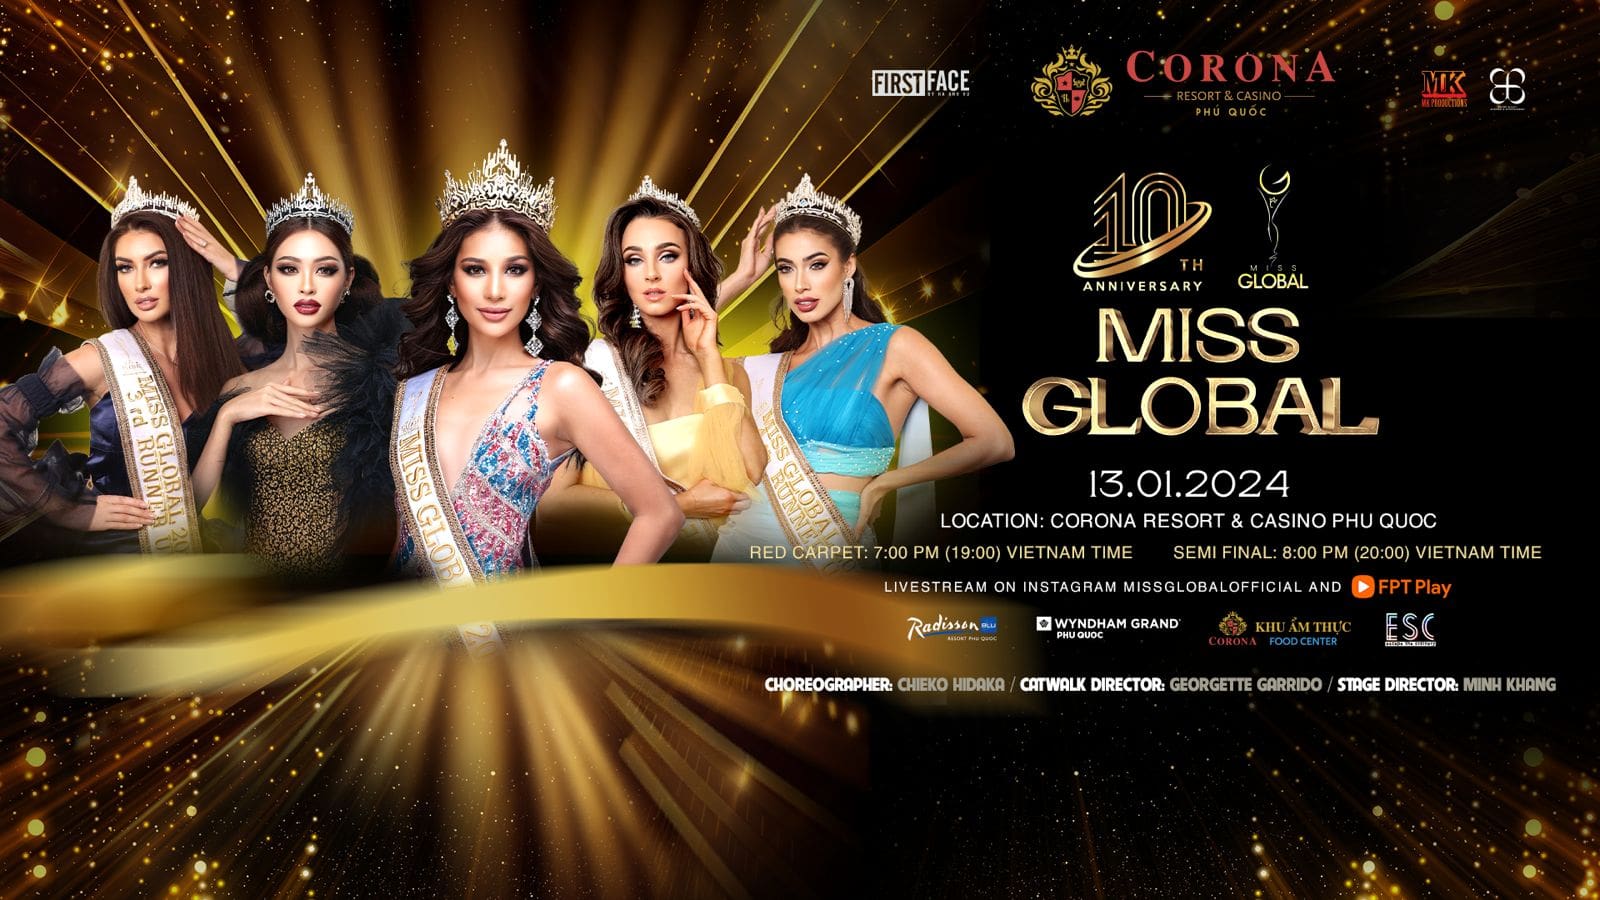 Why does Miss Global 2023 choose Corona Resort & Casino Phu Quoc as the